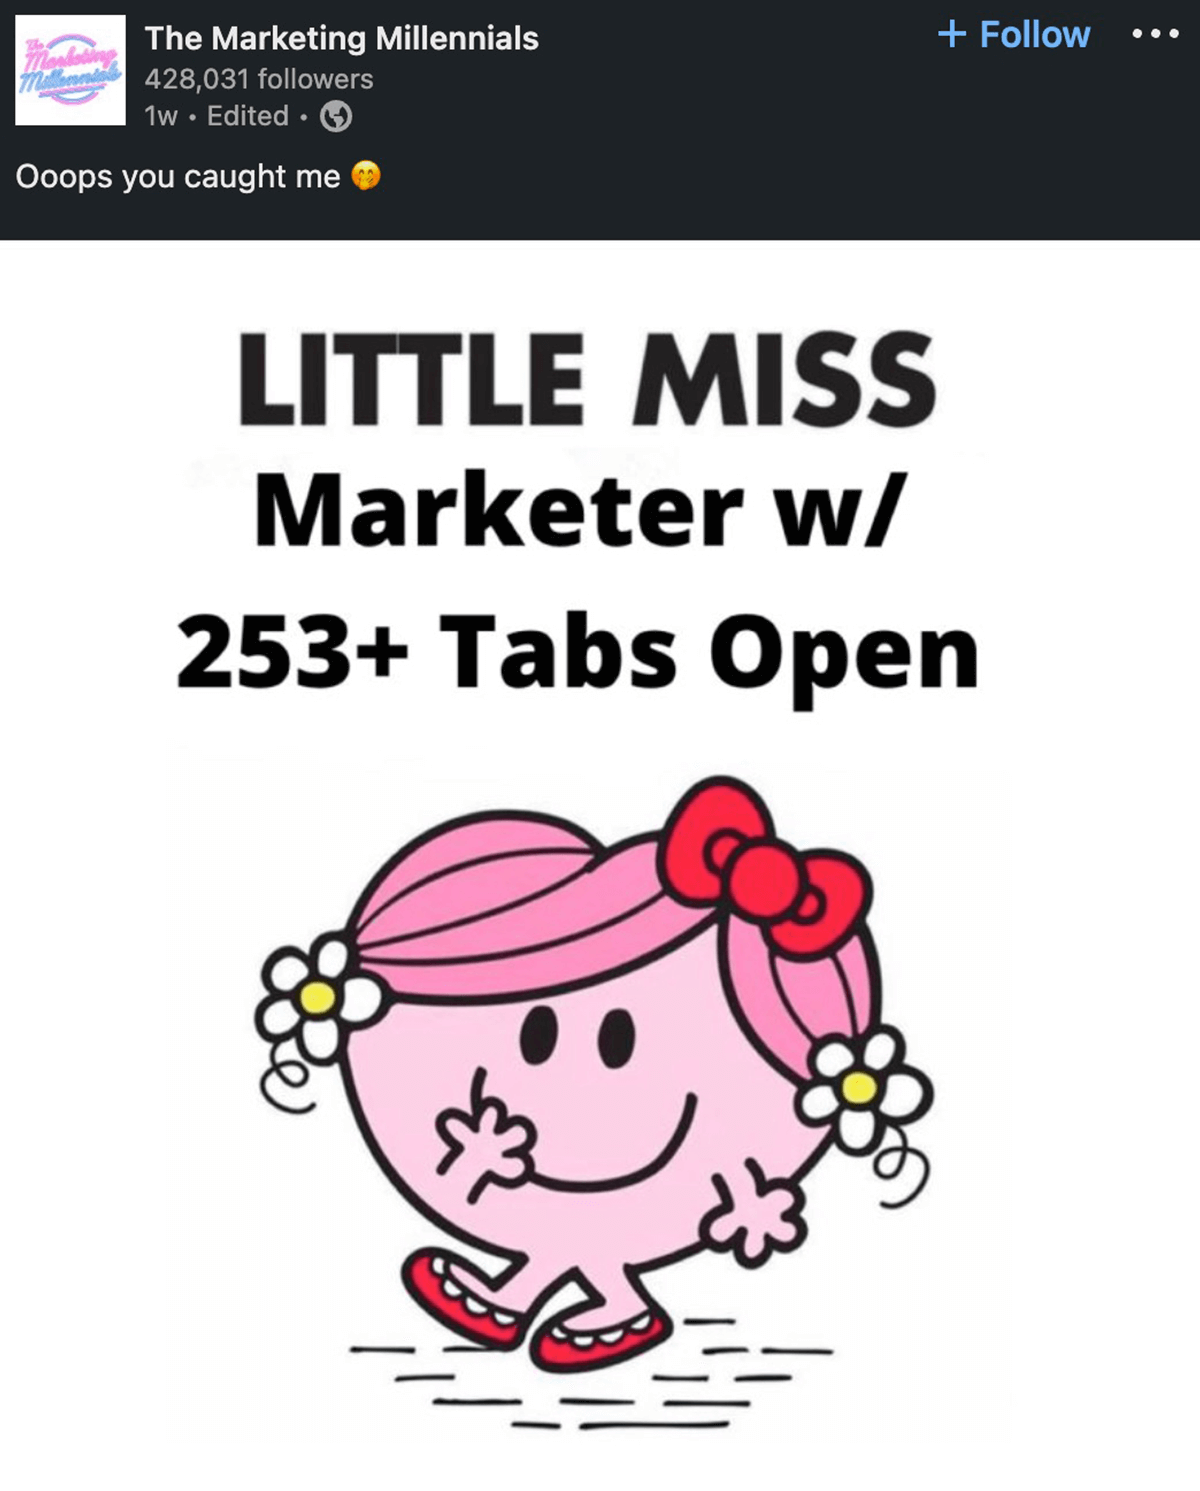 The Marketing Millennials on LinkedIn: Ooops you caught me. Image that says Little Miss Marketer with 253+ tabs open.